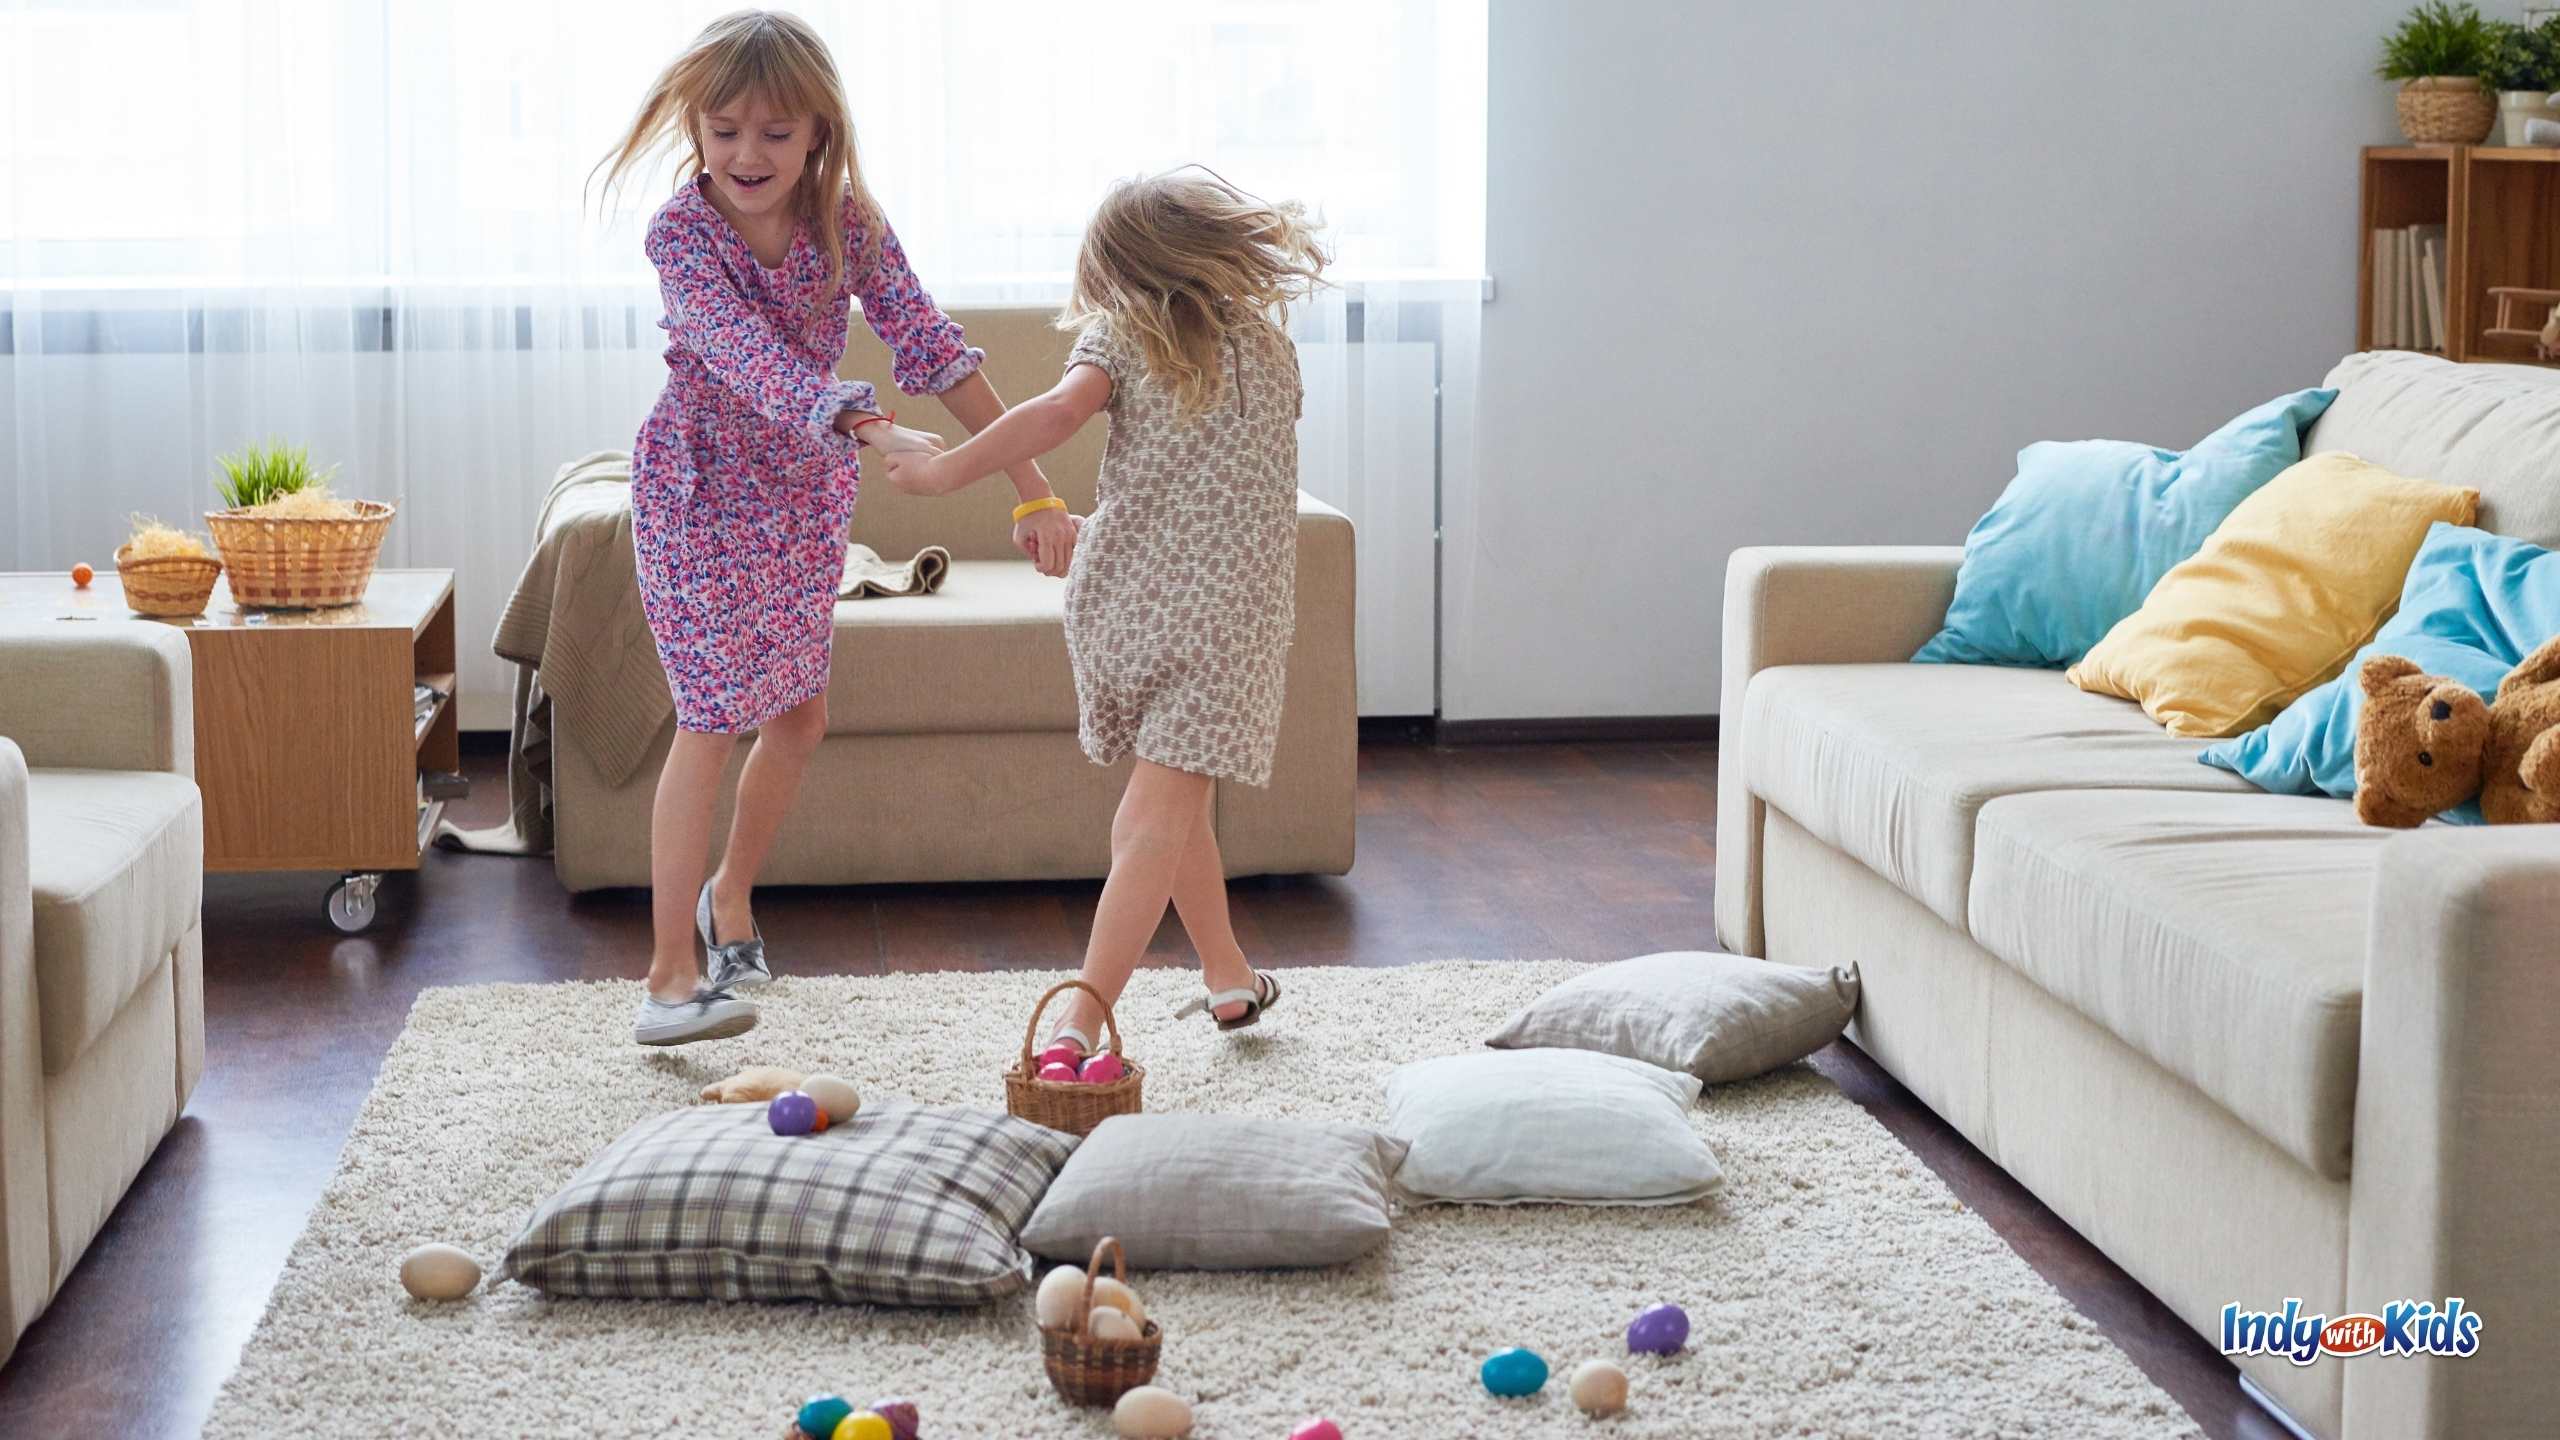 Things to do on Easter at Home: Two girls hold hands and dance around a living room scattered with pillows and easter eggs.